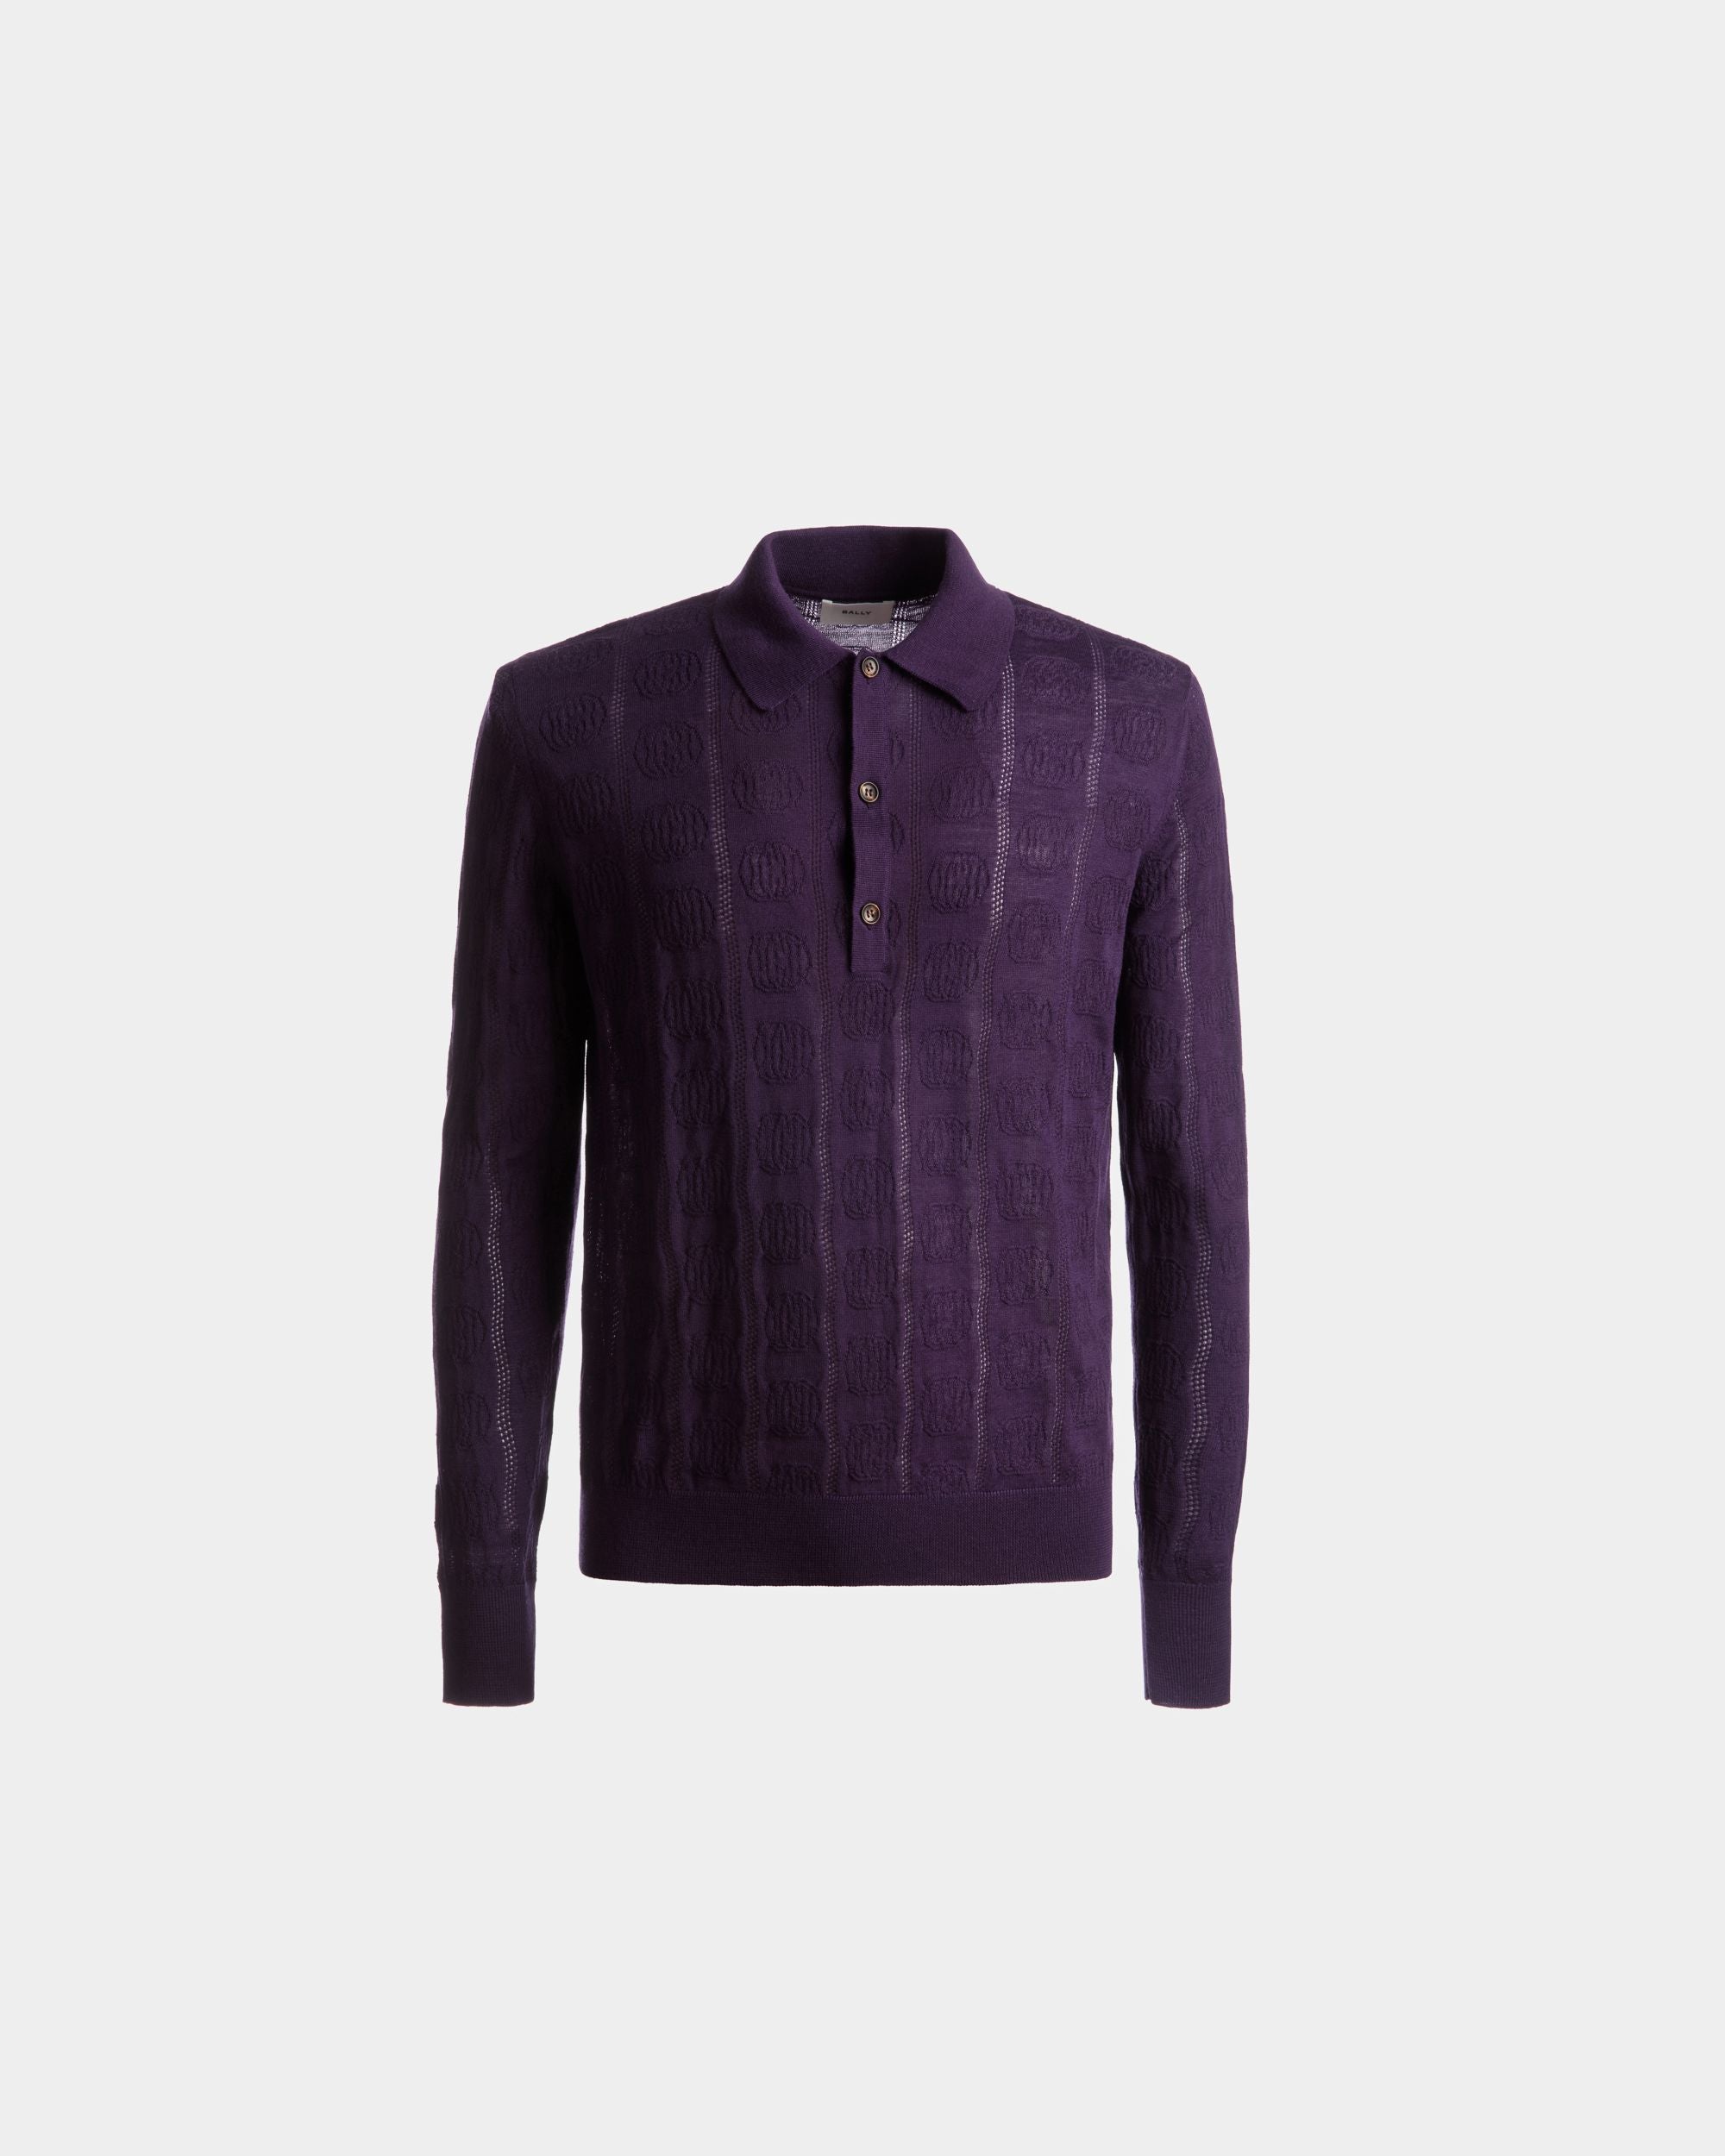 Long Sleeve Polo | Men's Polo Shirt | Orchid Wool | Bally | Still Life Front